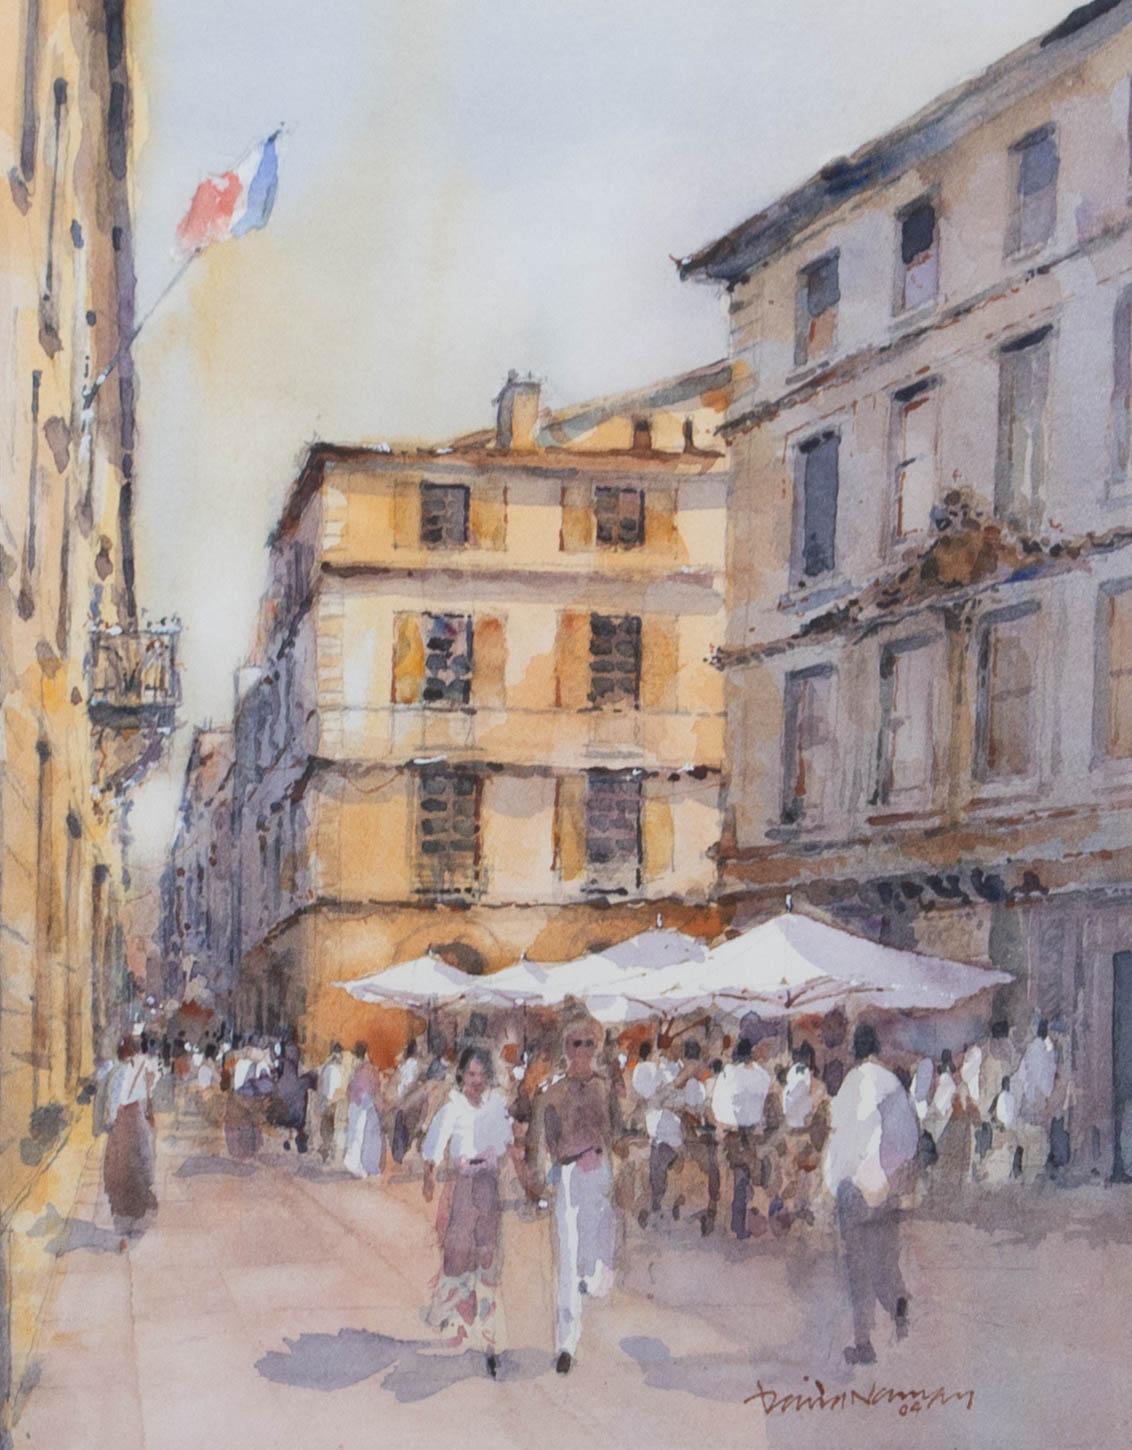 A wonderful French vista in Summer, with people strolling along the sun drenched streets past cafes full of diners. The artist has signed and dated to the lower right corner and the painting has been presented in a silvered frame with card mount. On